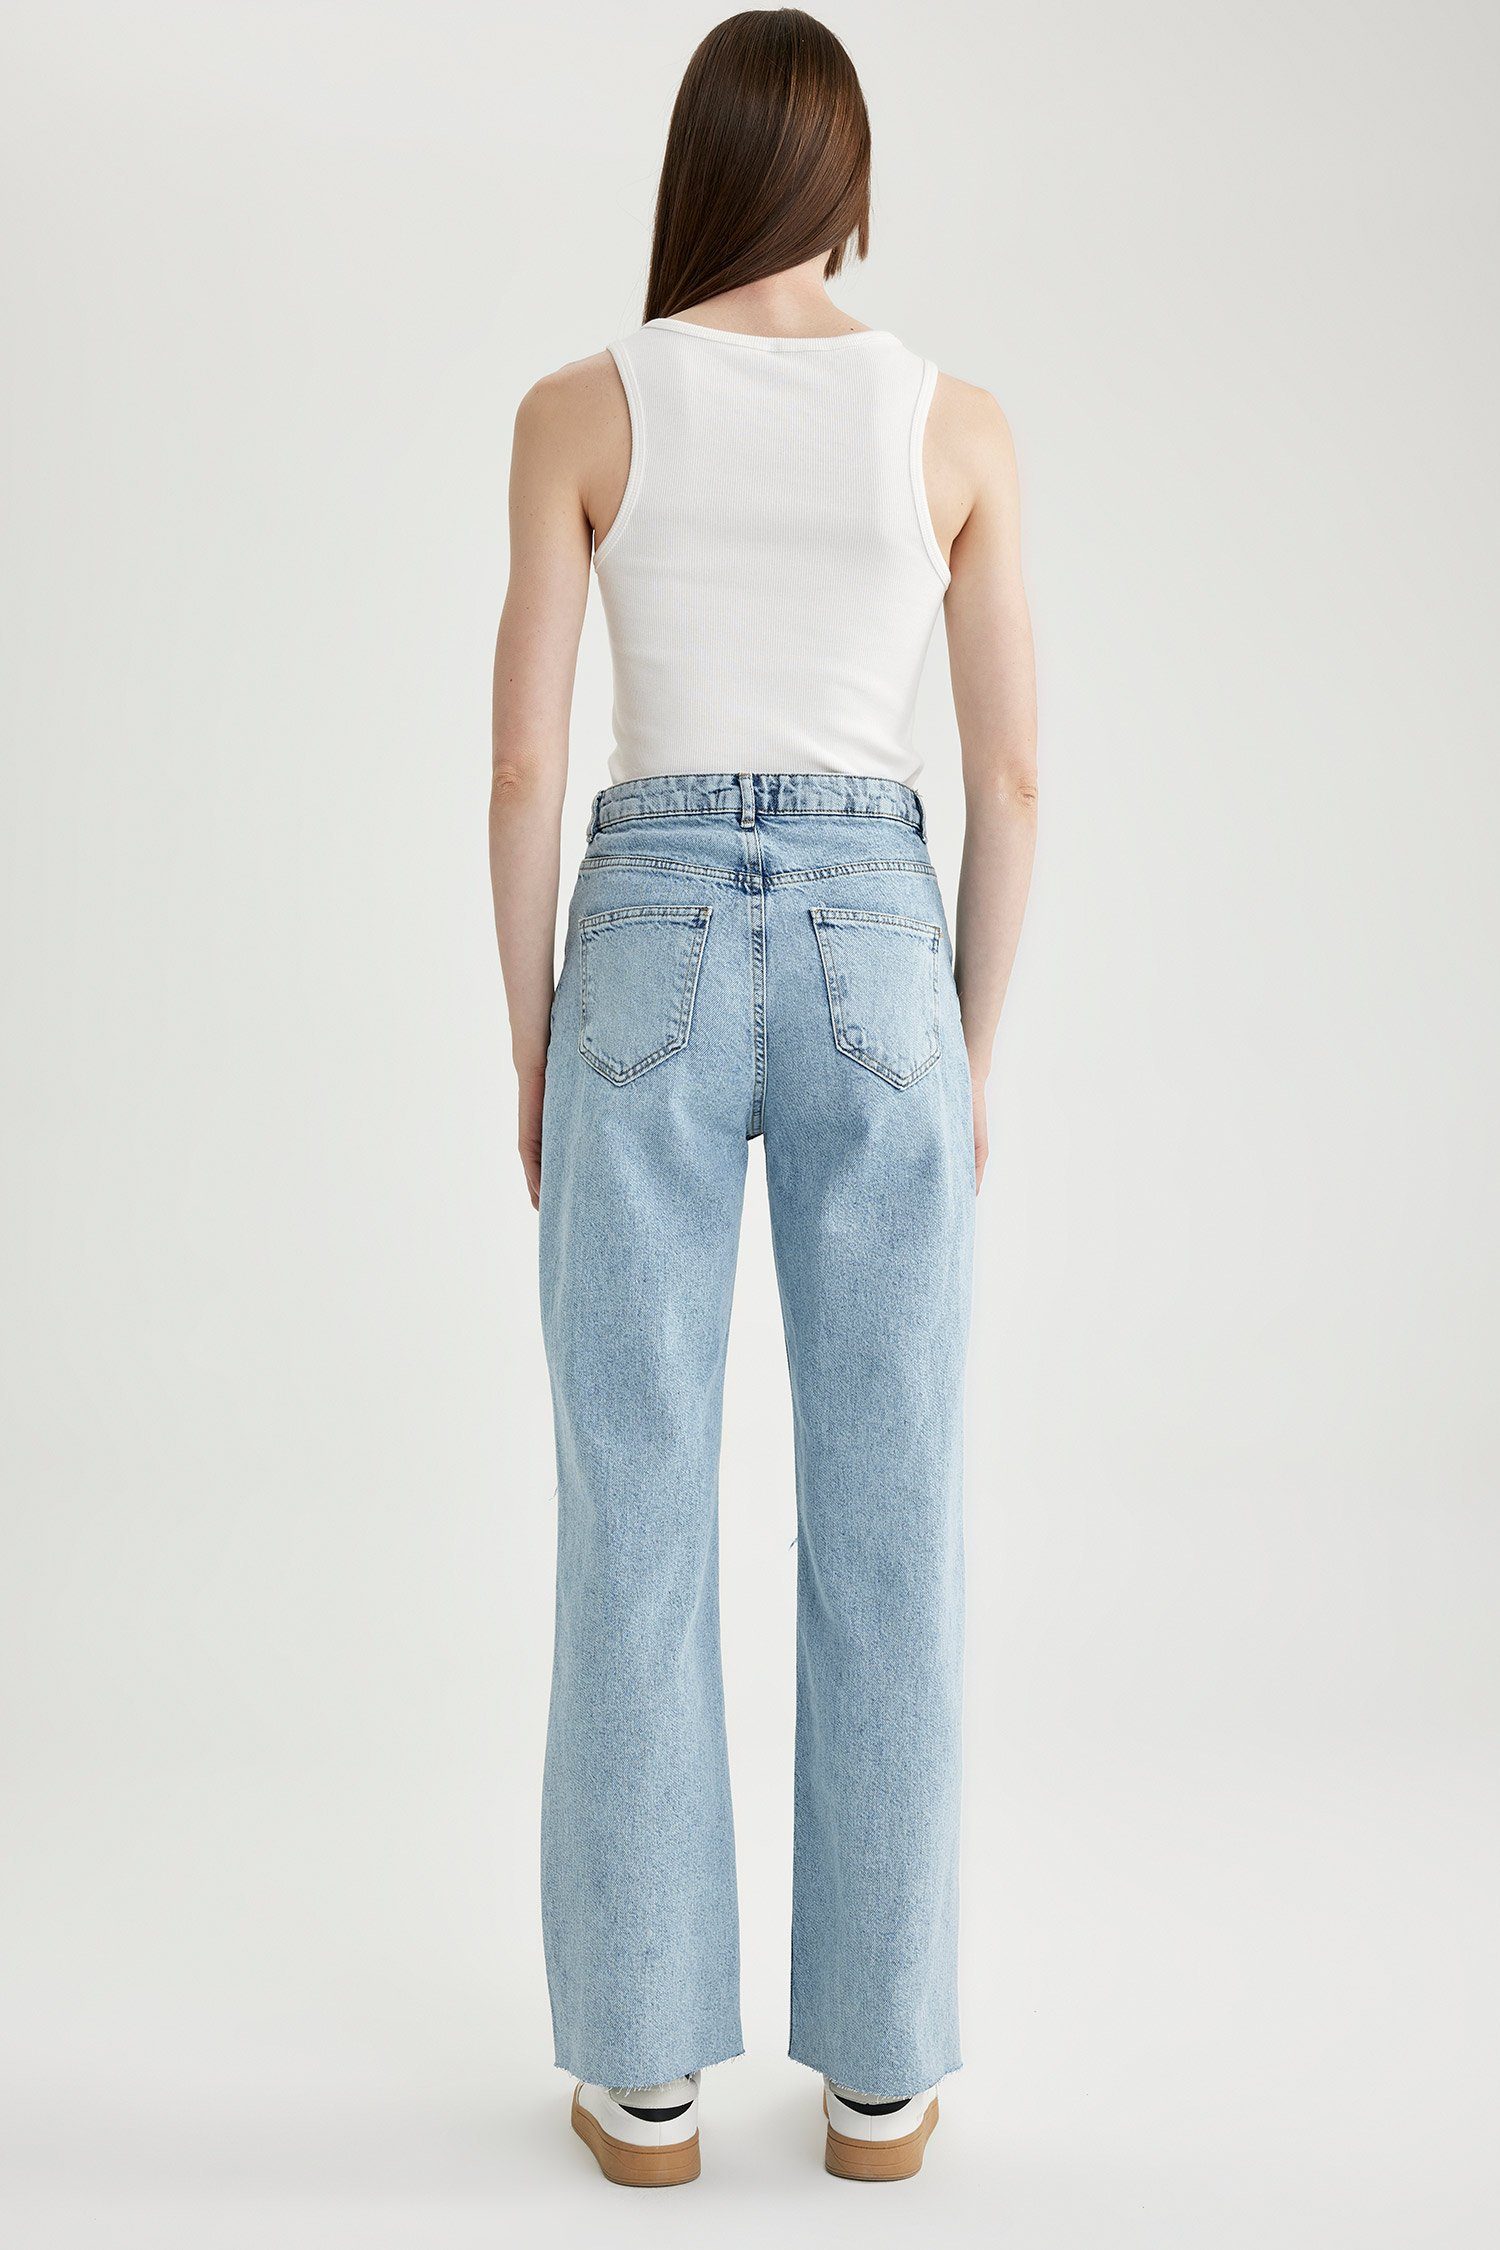 WIDE 90'S Relax-fit-Jeans Relax-fit-Jeans DeFacto LEG